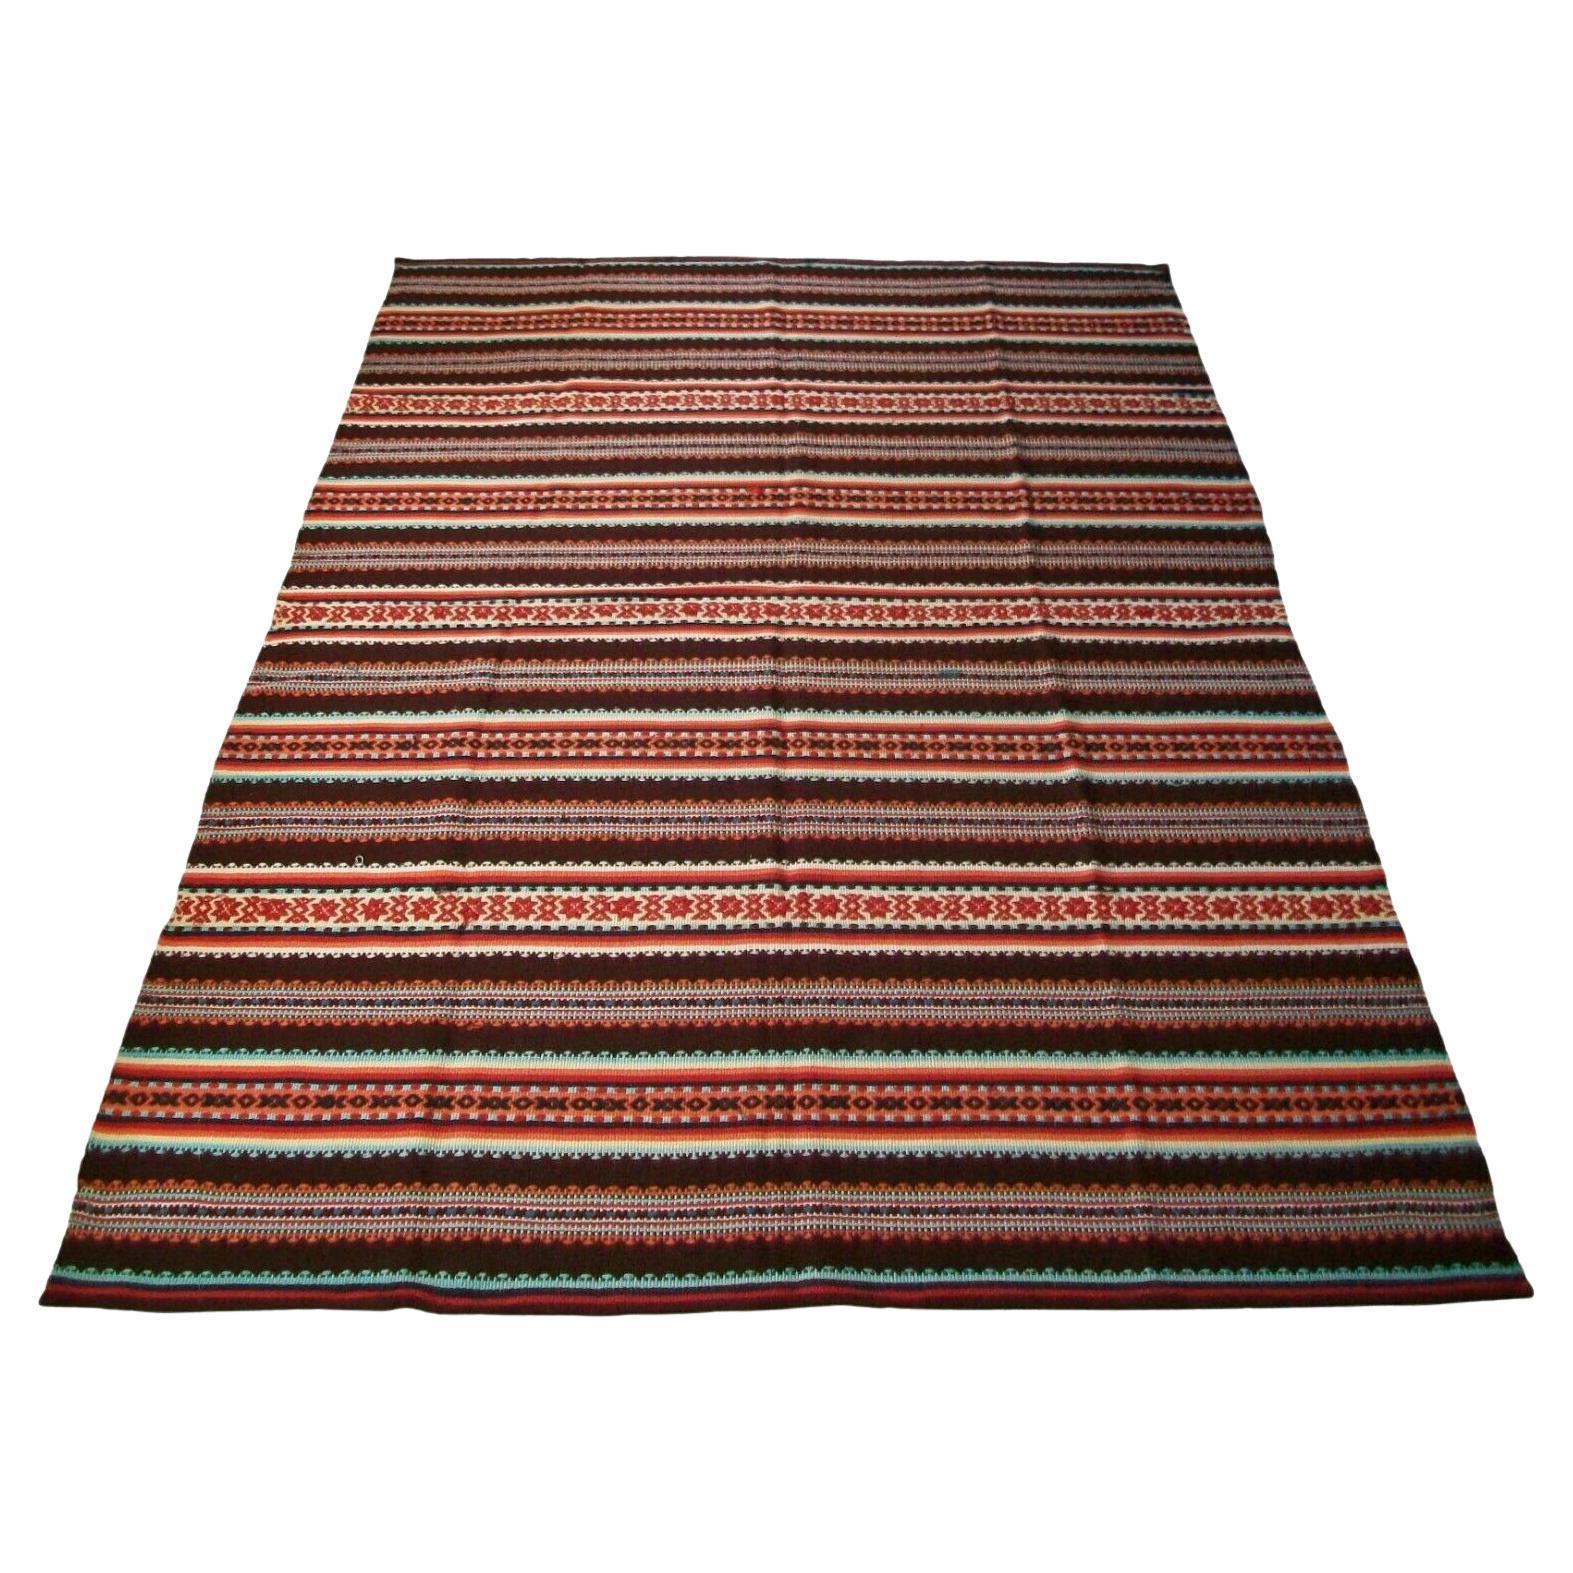 Vintage Embroidered Wool Serape Blanket or Rug, Mexico, C.1970's